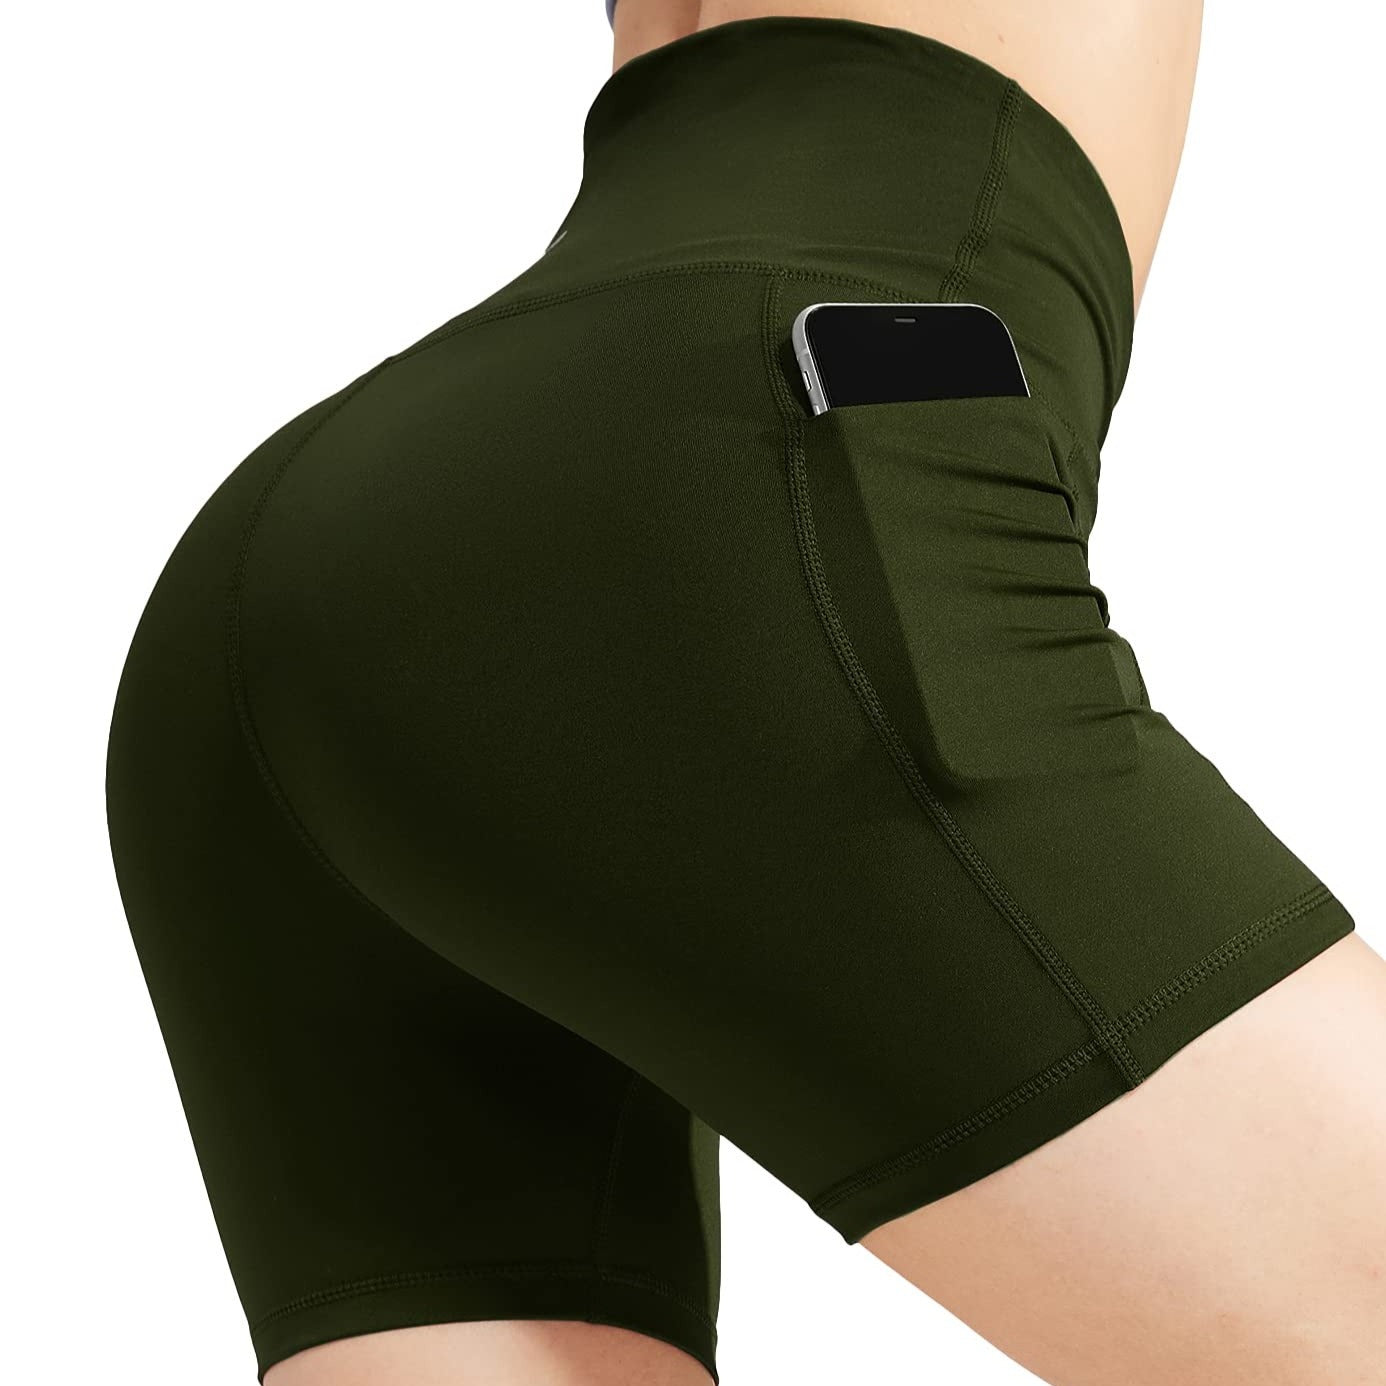 High Waist Yoga Tummy Control Shorts, 5Inch/8 Inch Bottoms Army Green / Small / 5 inches MIER